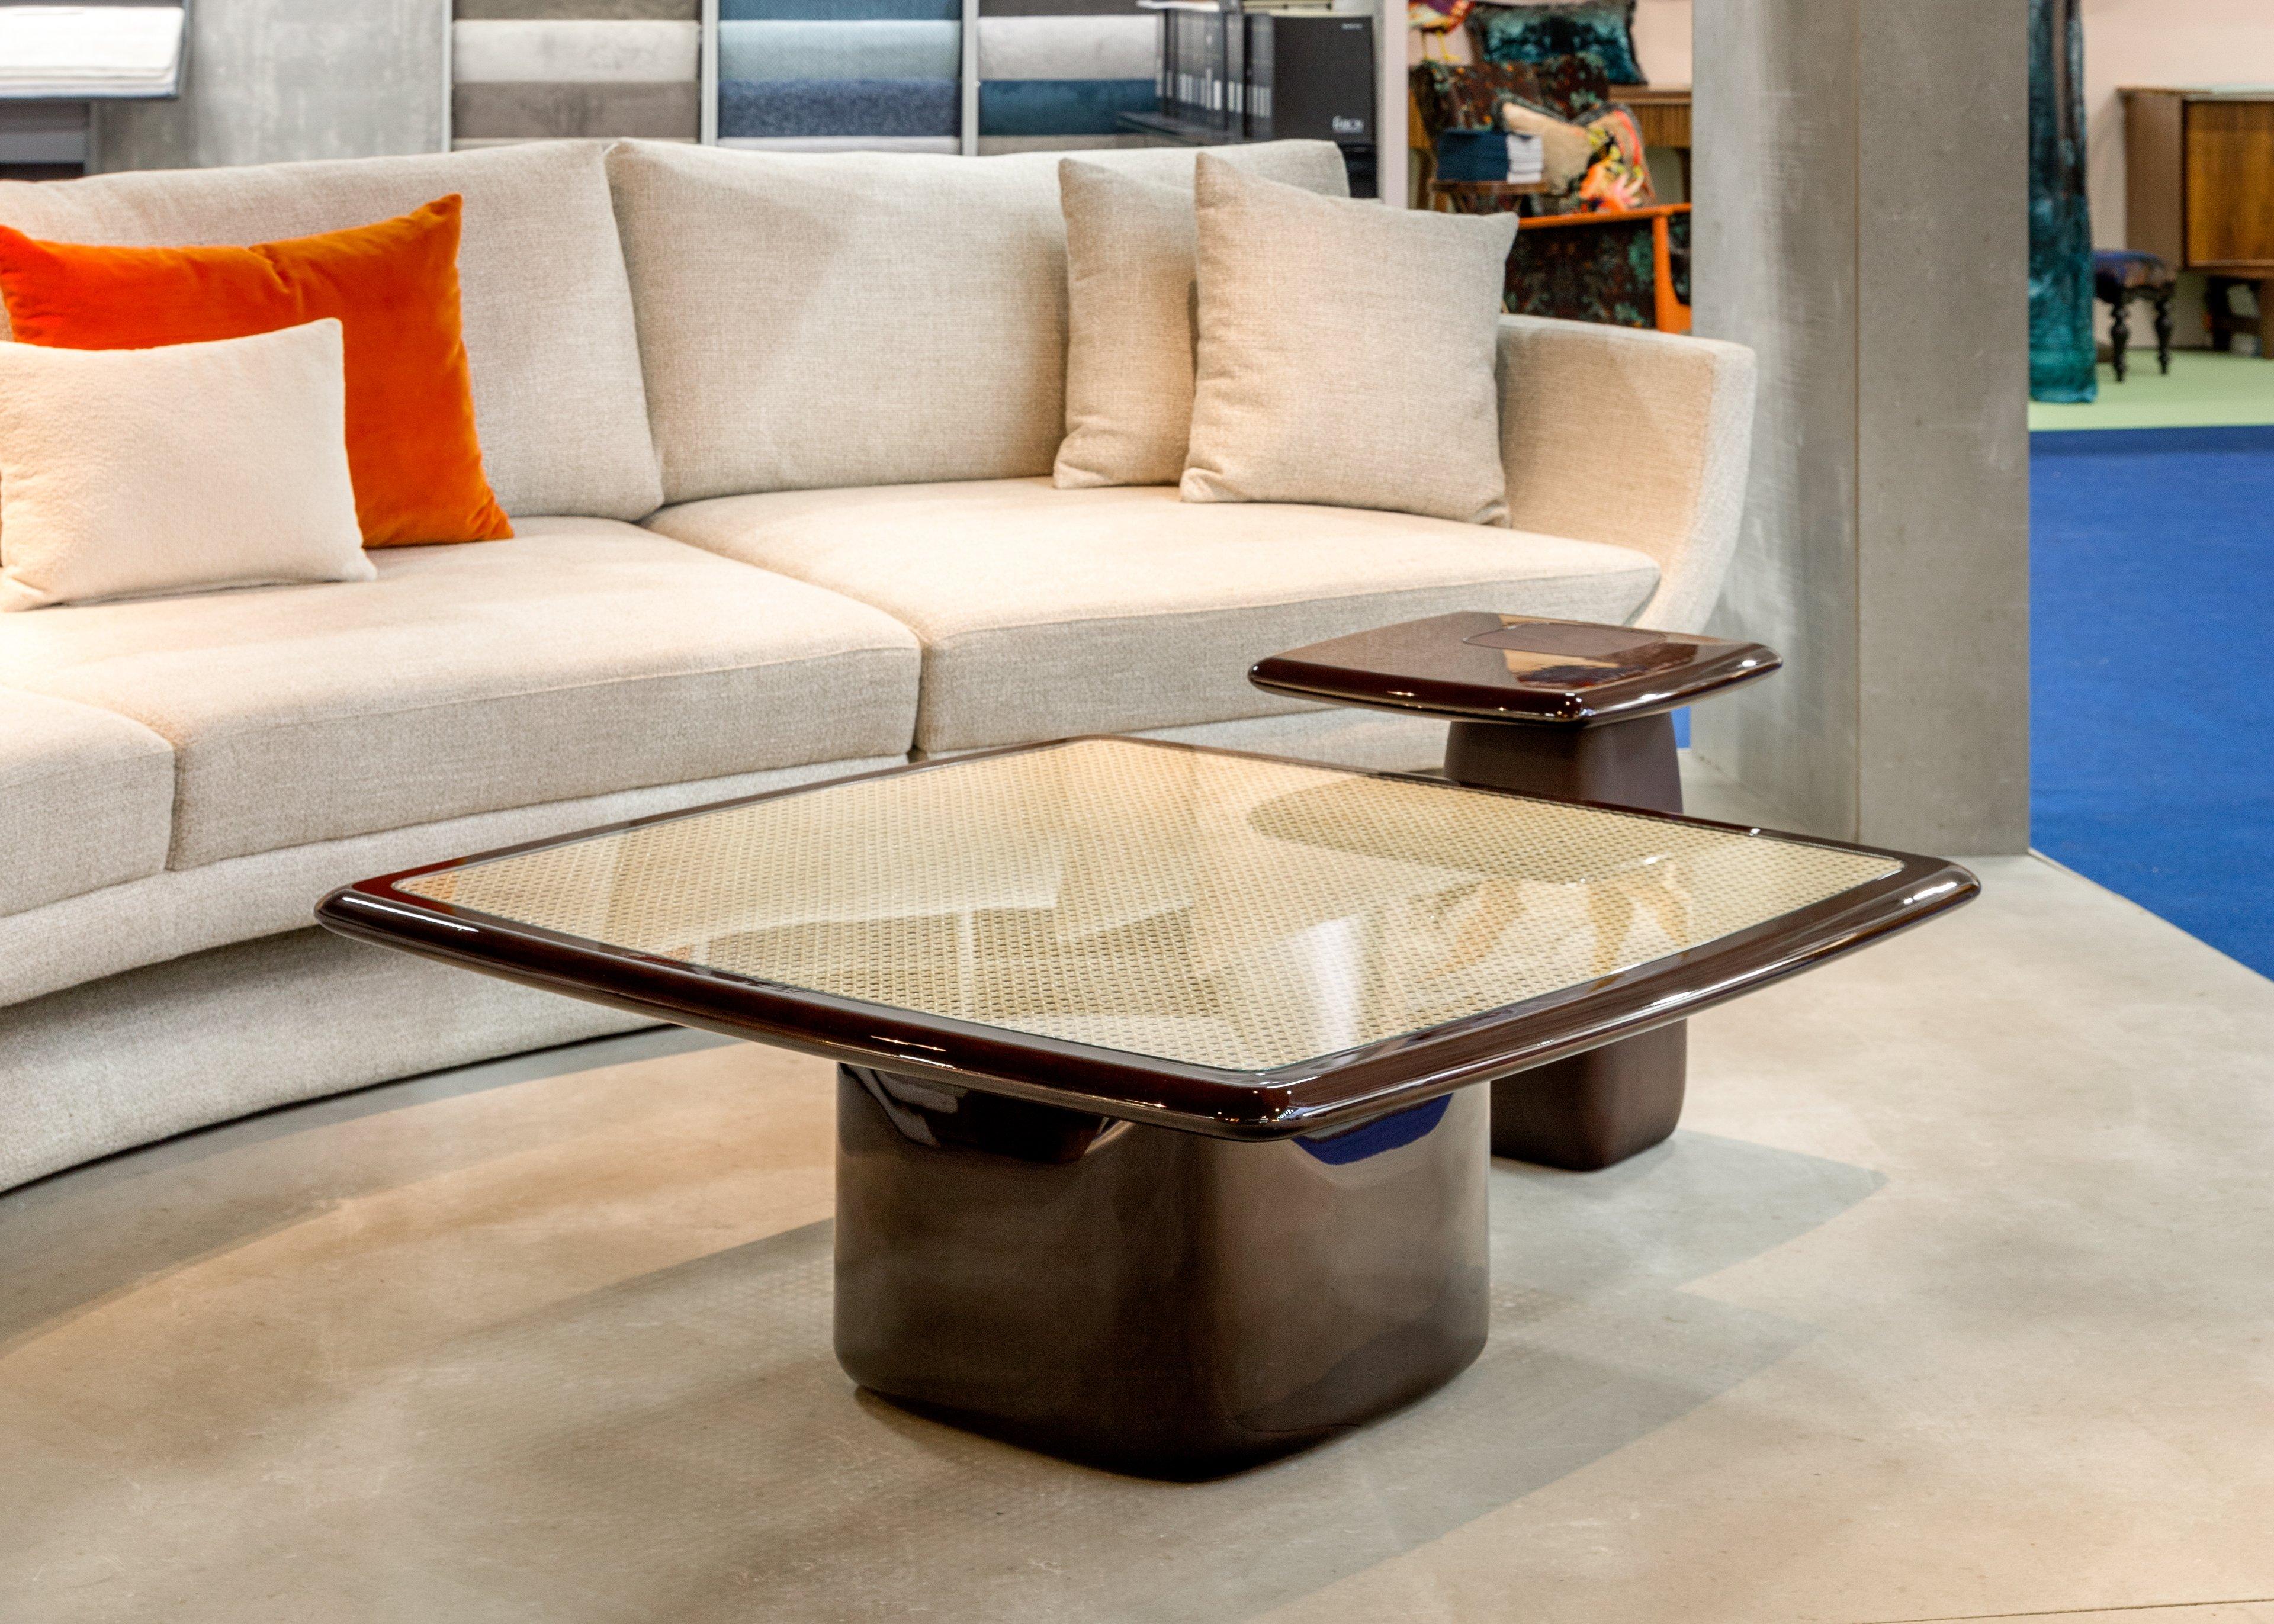 Contemporary Low Nesting Tables, High Gloss Mahogany/Natural Cane In New Condition For Sale In New York, NY